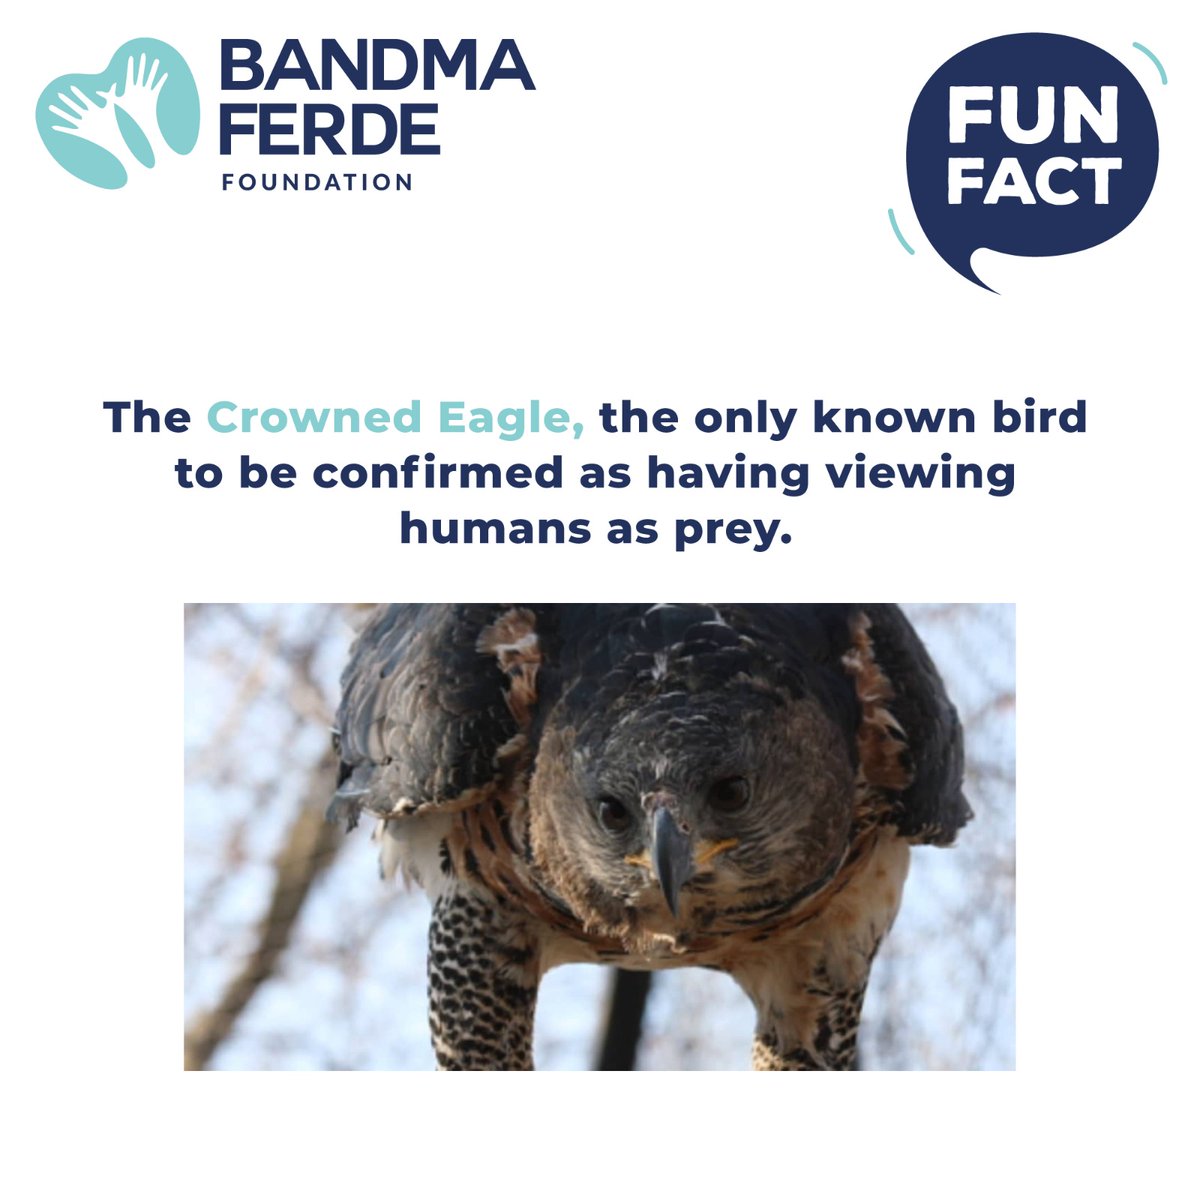 𝐅𝐮𝐧 𝐅𝐚𝐜𝐭: The Crowned Eagle, the only known bird to be confirmed as having viewing humans as prey. For more information visit the link: linktr.ee/Bandmaferdefou… #Bandmaferdefoundation #Bandmaferde #NGOIndia #nonprofitorganizationindia #funfacts #facts #crownedeagle